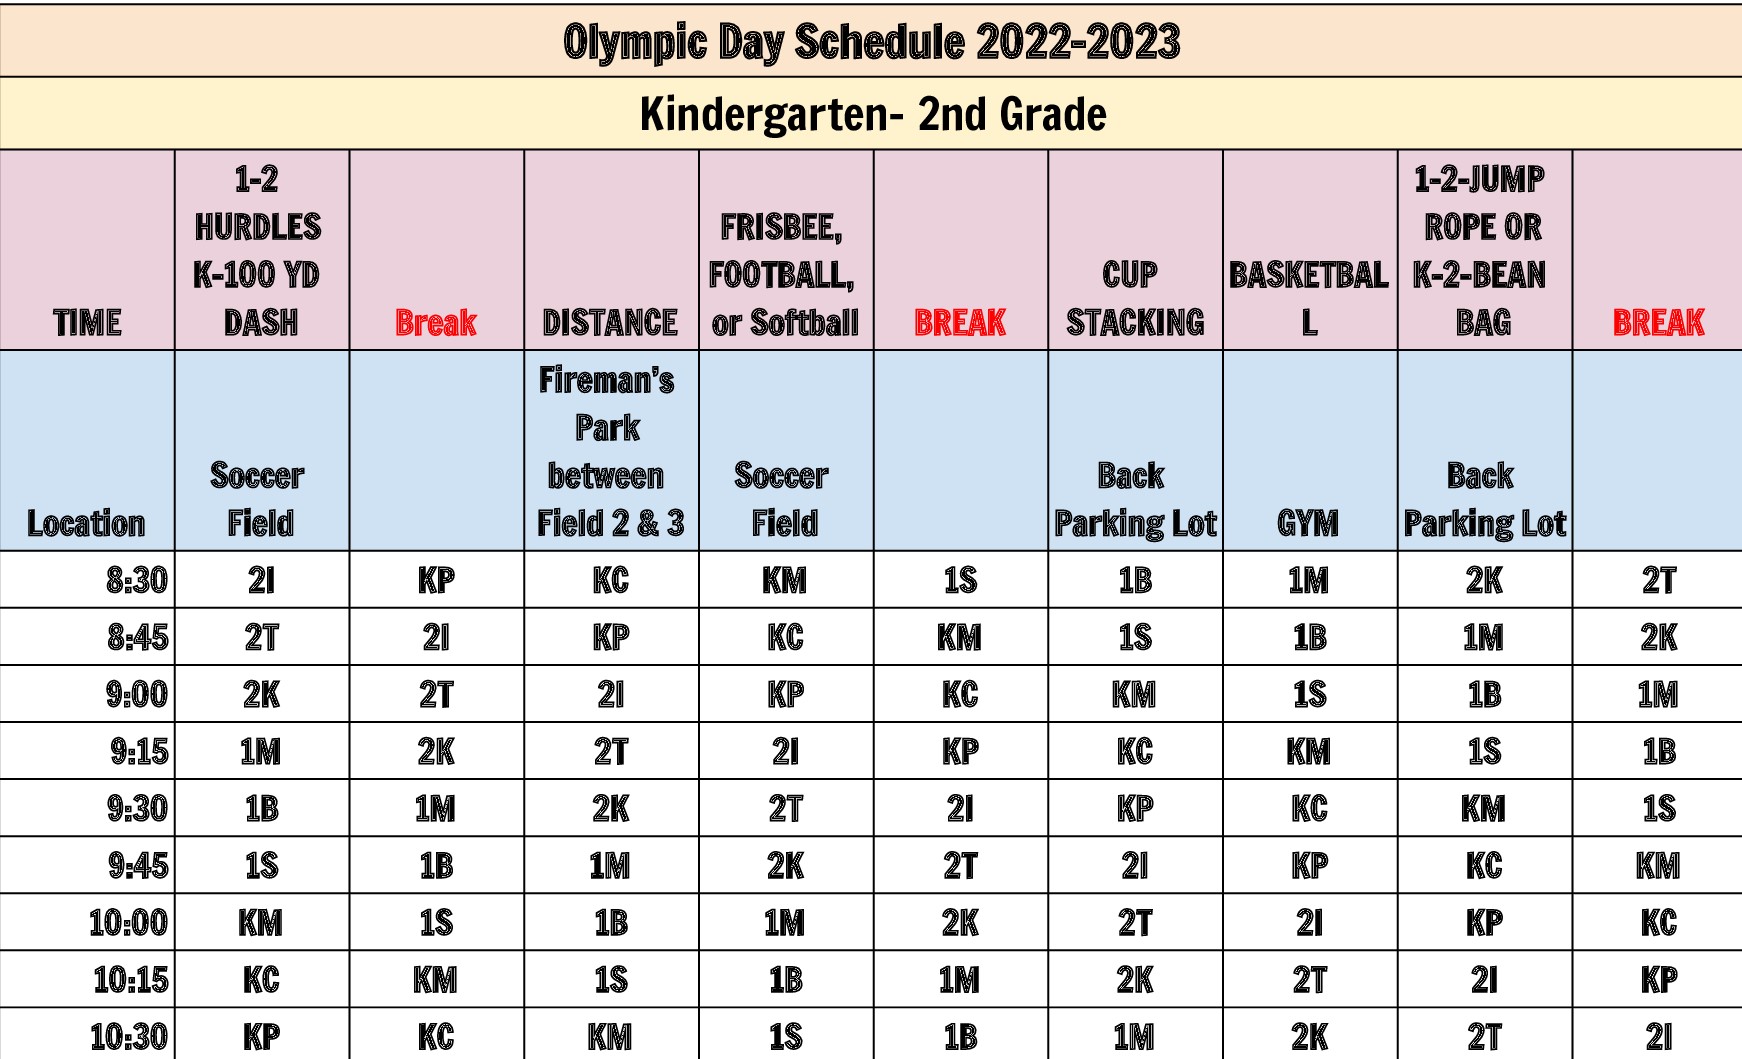 Olympic Day Schedule K-2